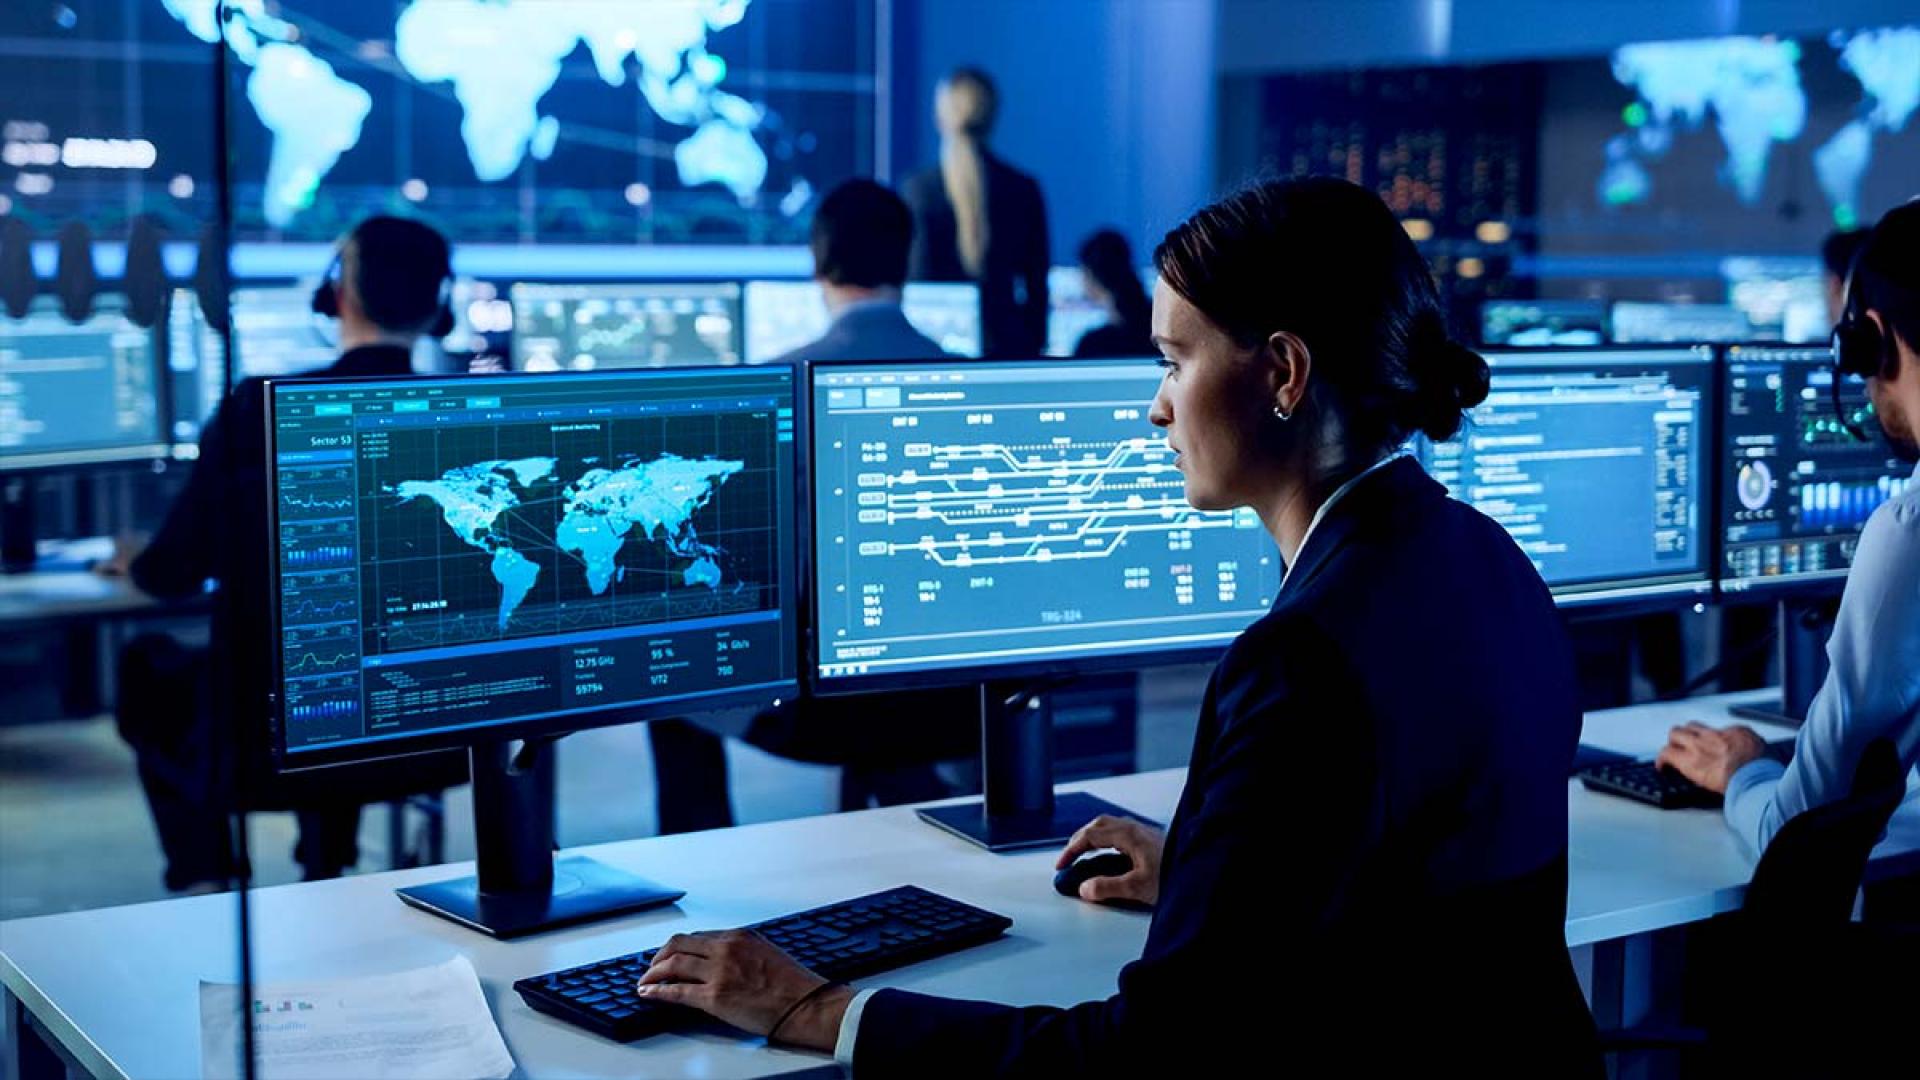 Women In cyber: Navigating a male-dominated industry